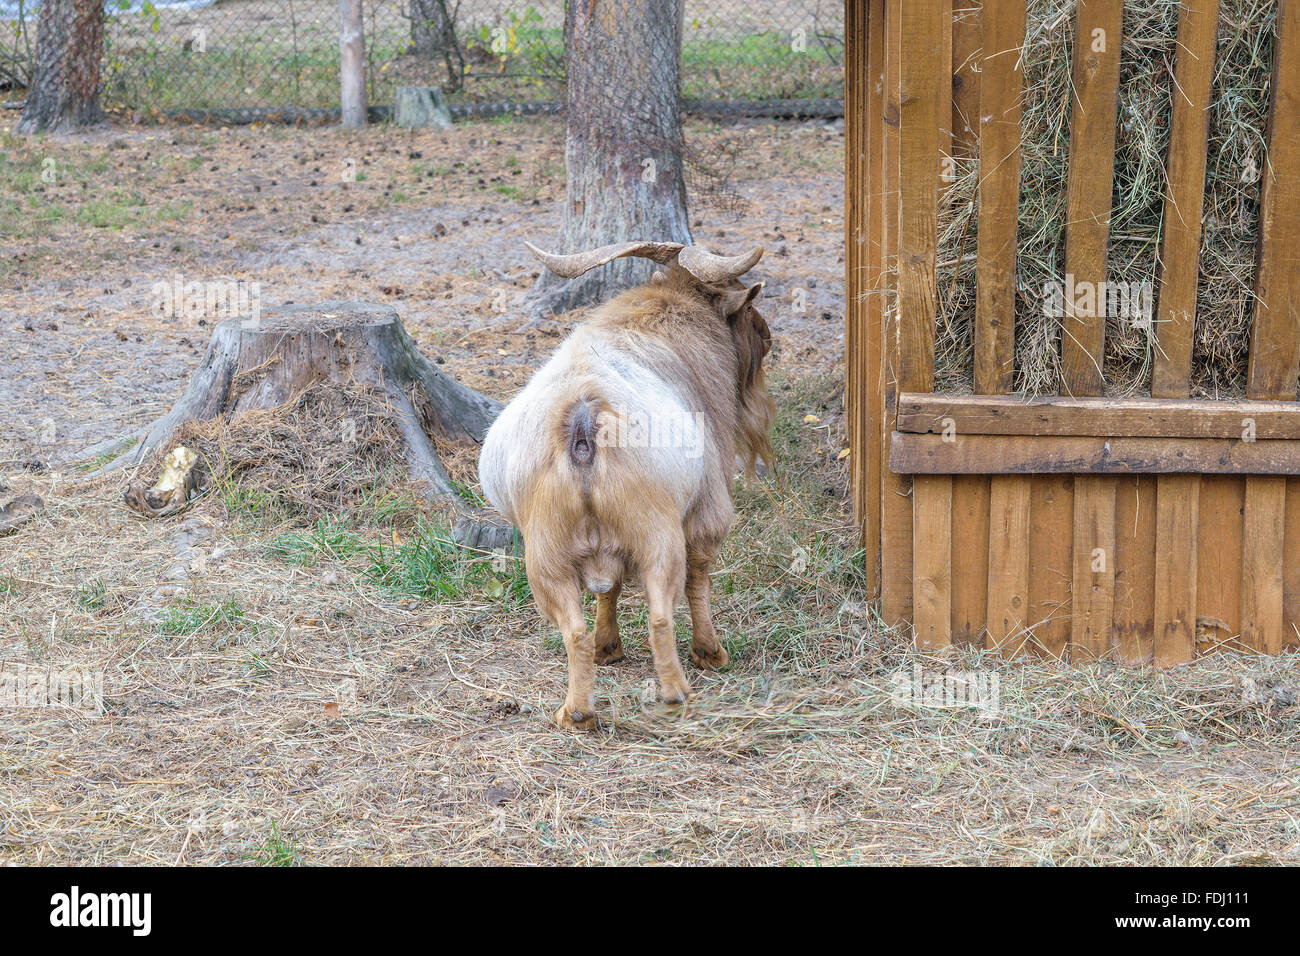 Shaggy horned mountain sheep (ovis ammon) near the feeders with hay (rear view) Stock Photo